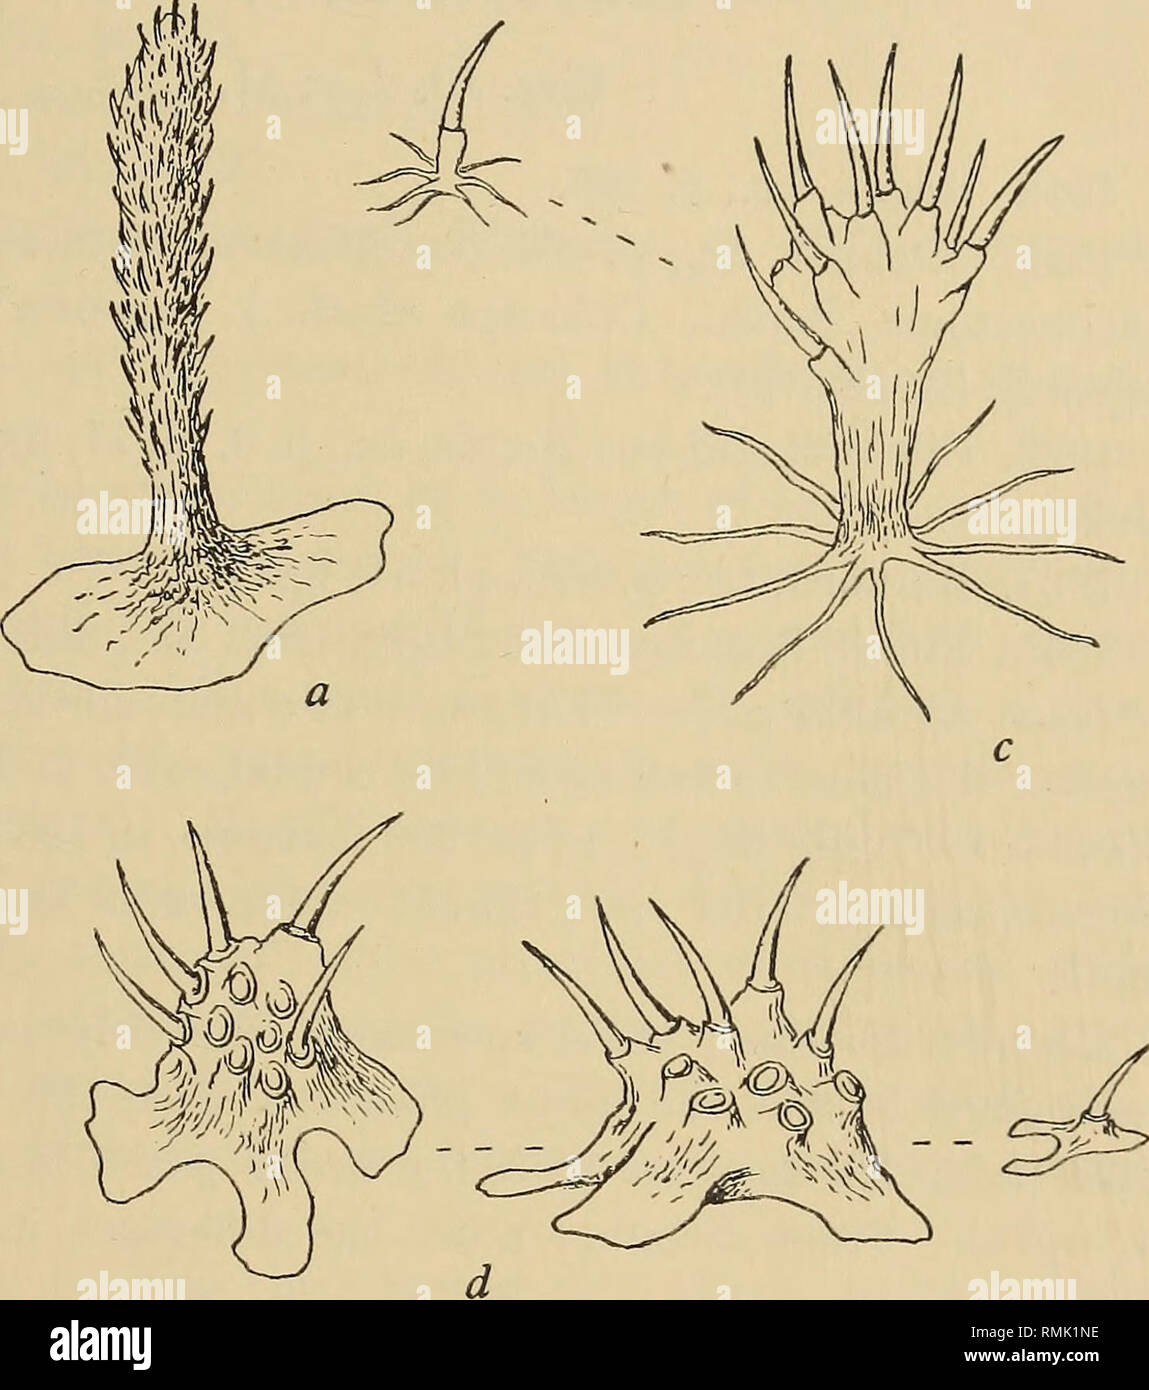 . Annals of the South African Museum = Annale van die Suid-Afrikaanse Museum. Natural history. Fig. 11.—Stromateidae, papillae from lining of oesophageal sacs, a, Psenes indicus. b, Cubiceps capensis. c, Nomeus gronovii, a small and a large papilla. d, Centrolopkus niger, on right a small papilla, or one at an early stage of growth. In Cubiceps capensis and Nomeus the papillae have stellate bases (fig. 11, b, c). In Centrolophus niger they are of heavier build, some- what like a humped-up starfish, and when closely packed they form quite a firm &quot;horny&quot; layer, which has a Polyzoan-lik Stock Photo